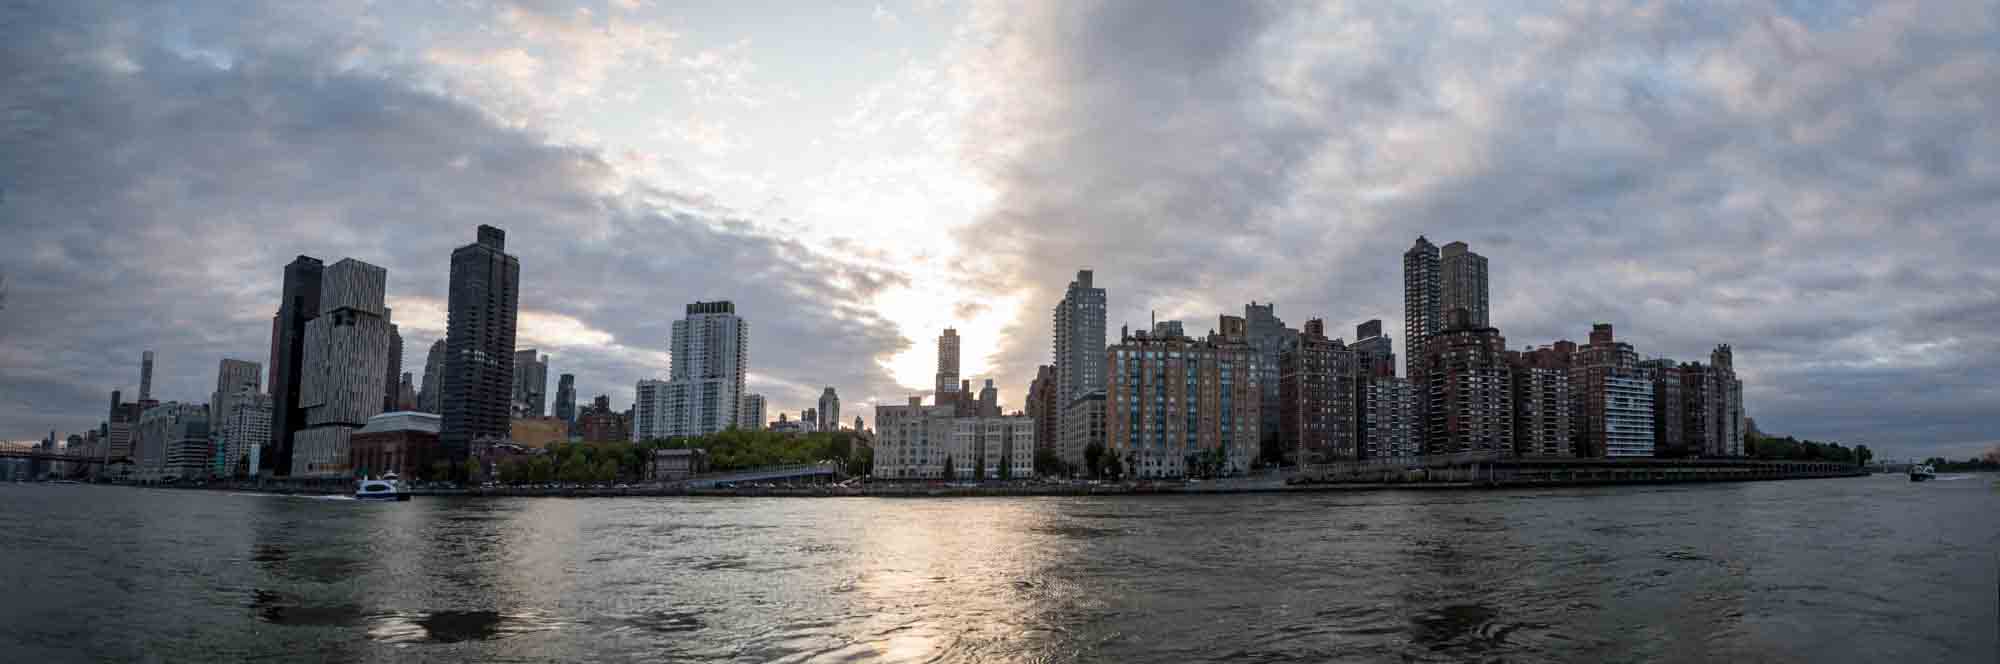 Panorama view of NYC skyline at sunset view from Roosevelt Island